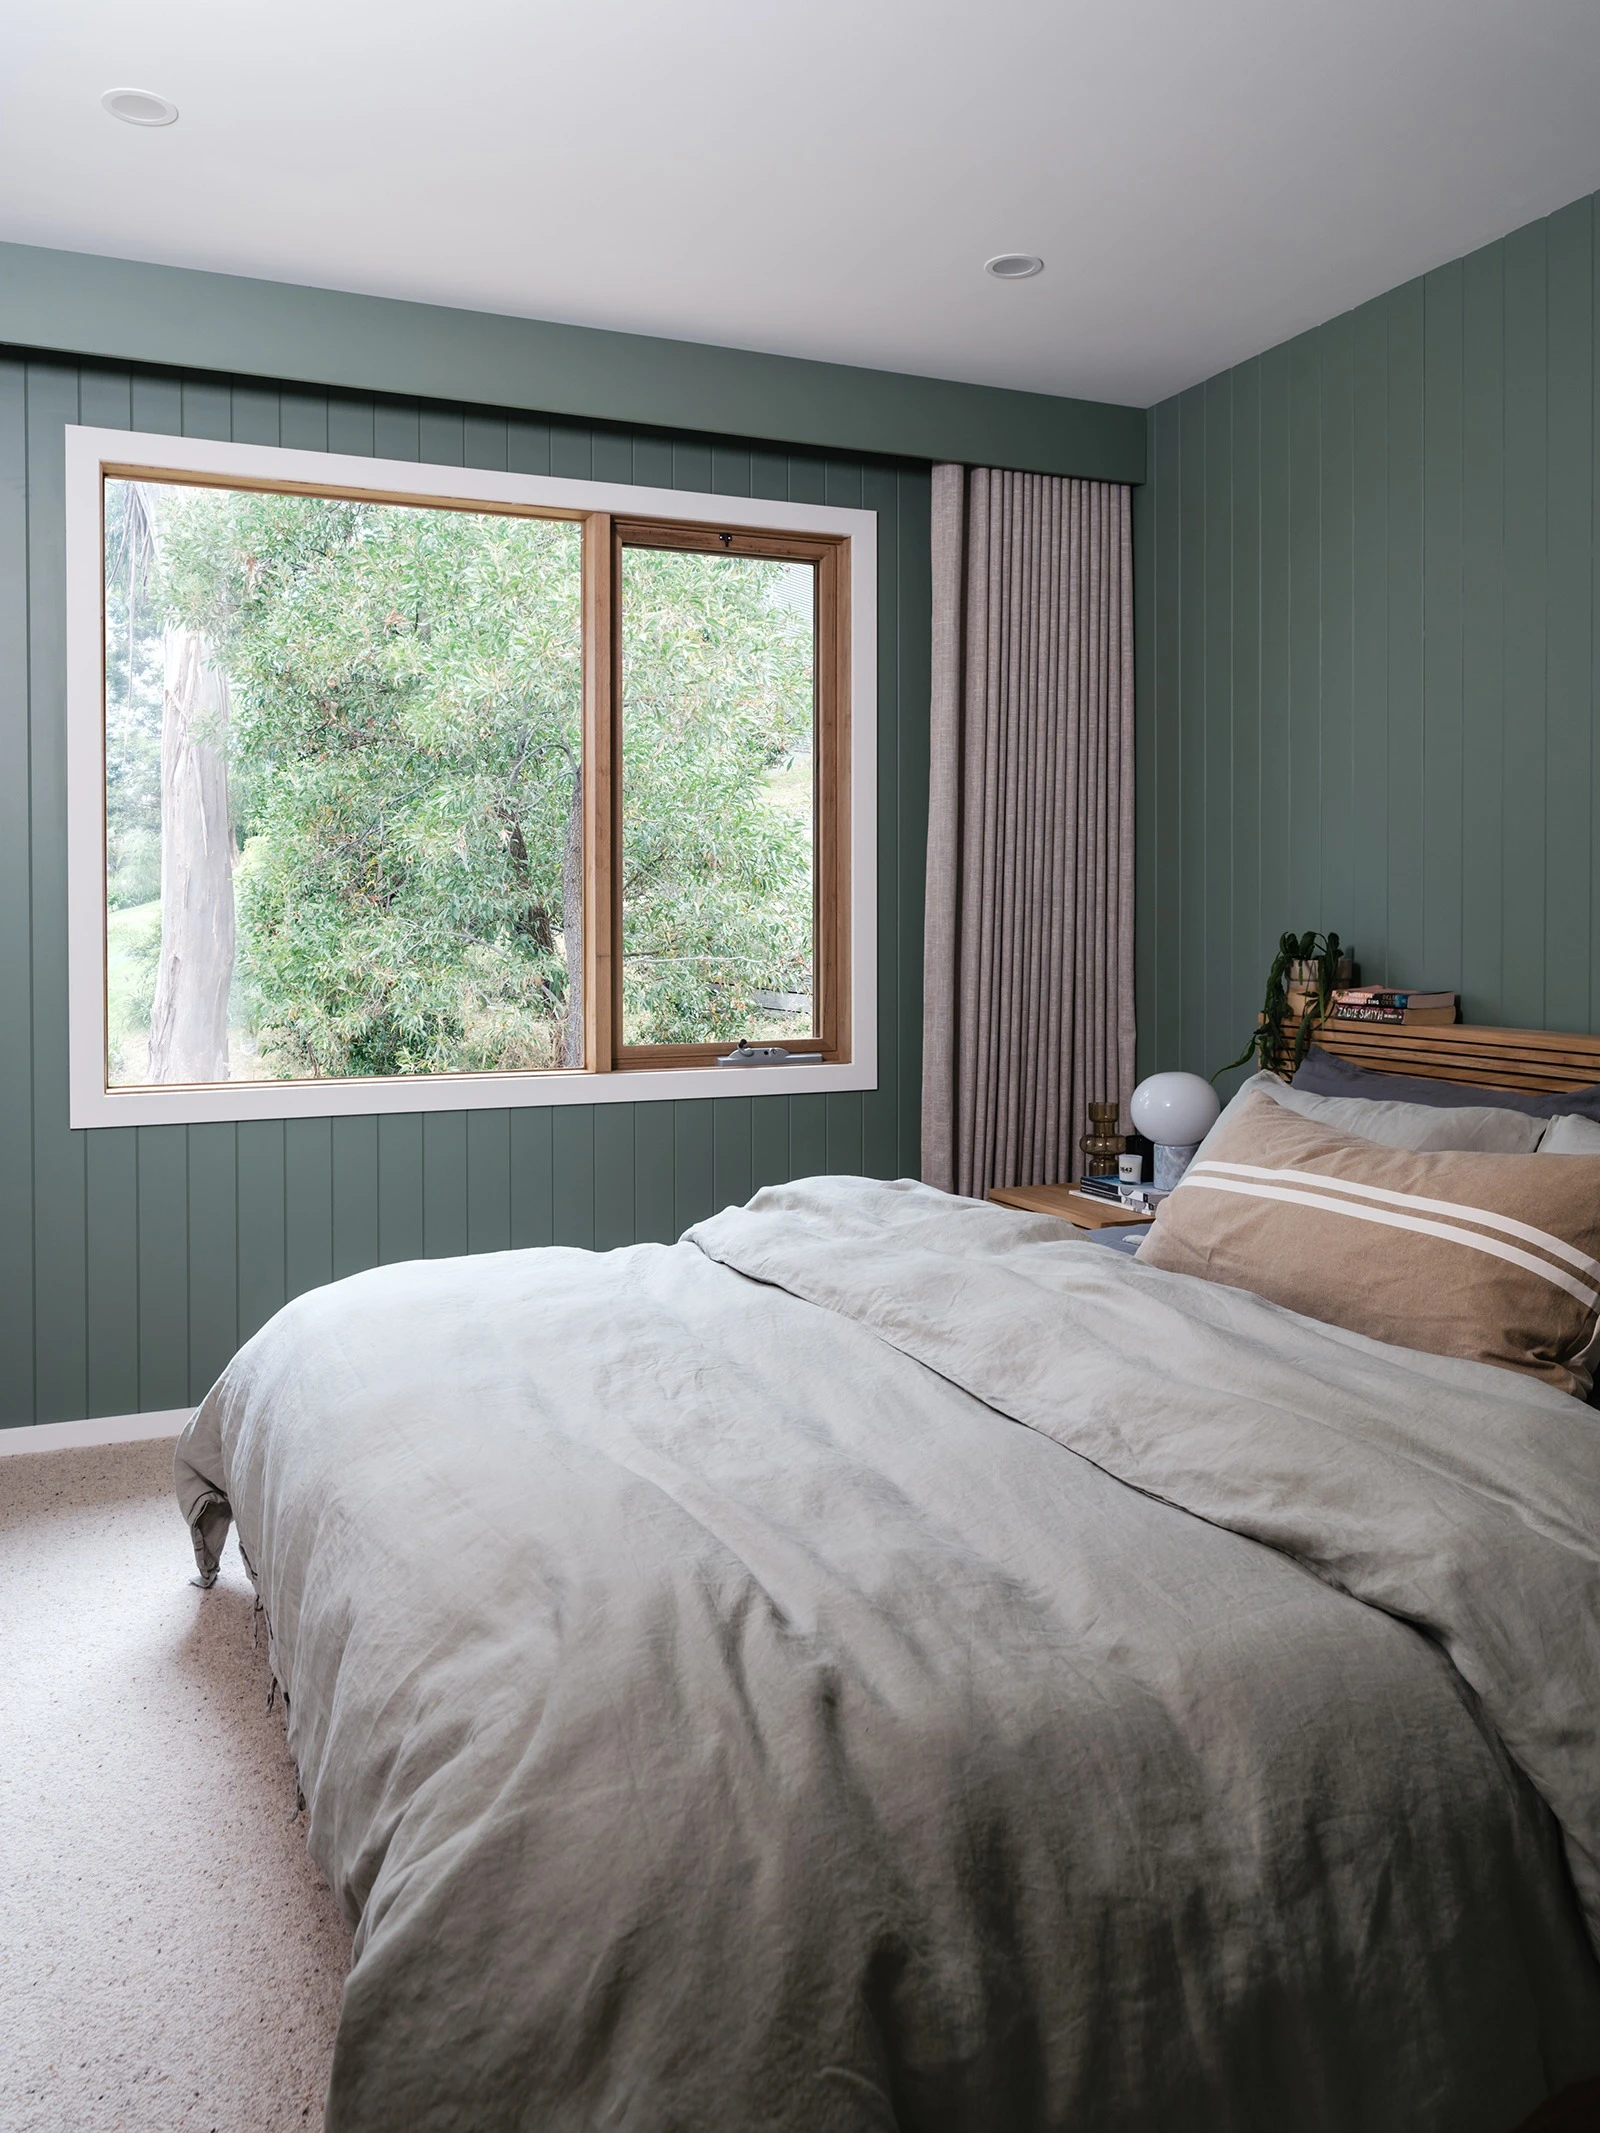 Guest bedroom with green walls and large window